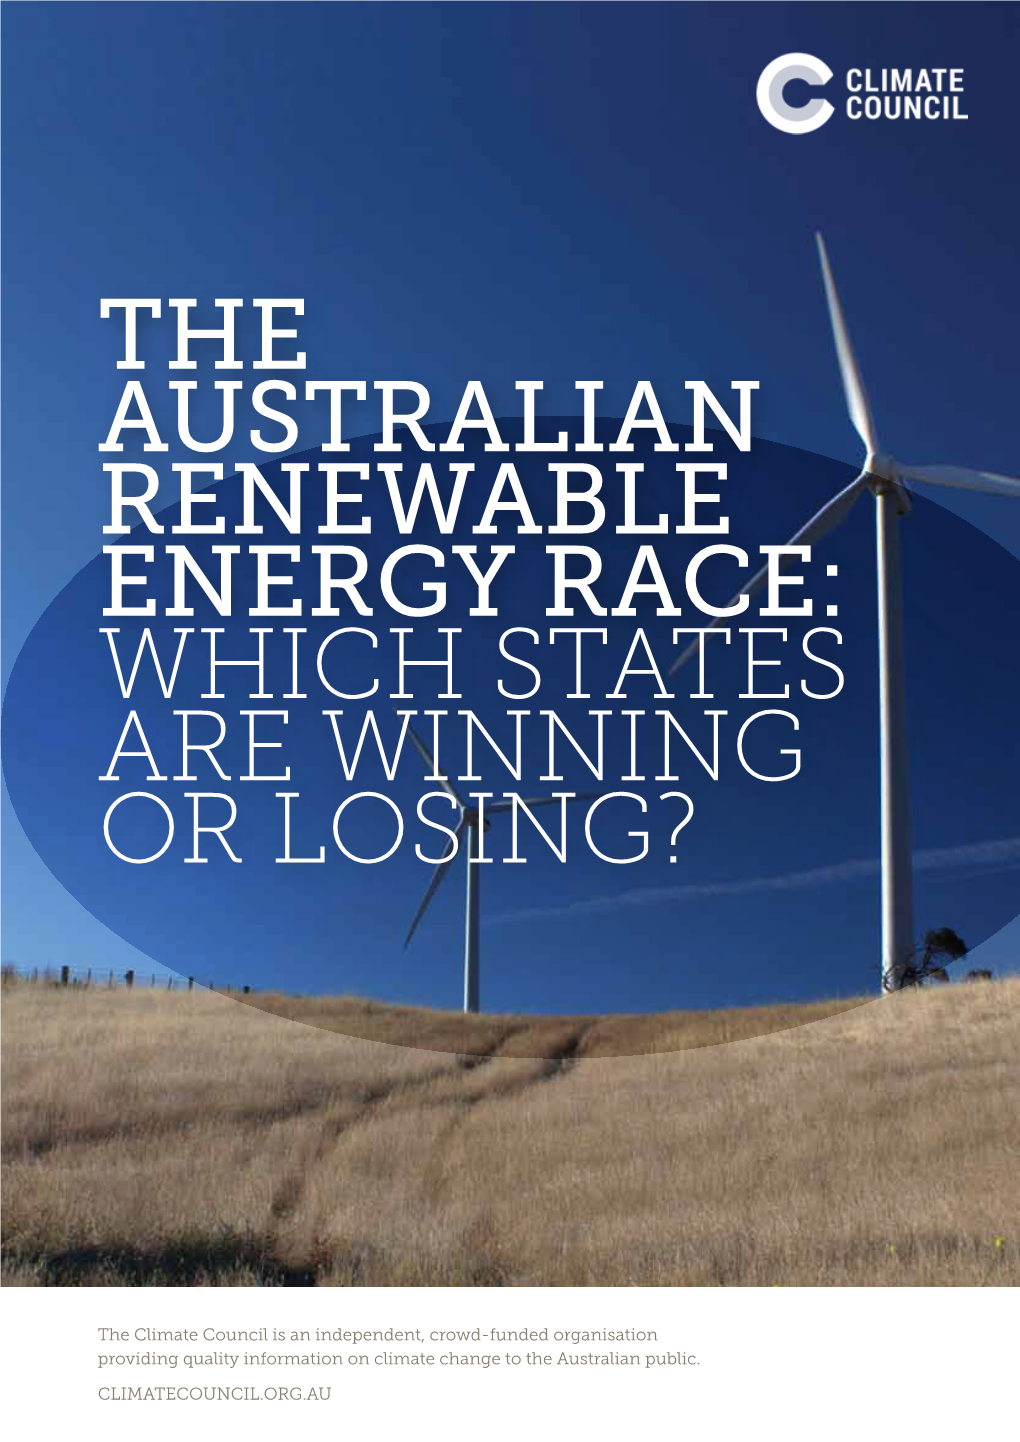 The Australian Renewable Energy Race: Which States Are Winning Or Losing?